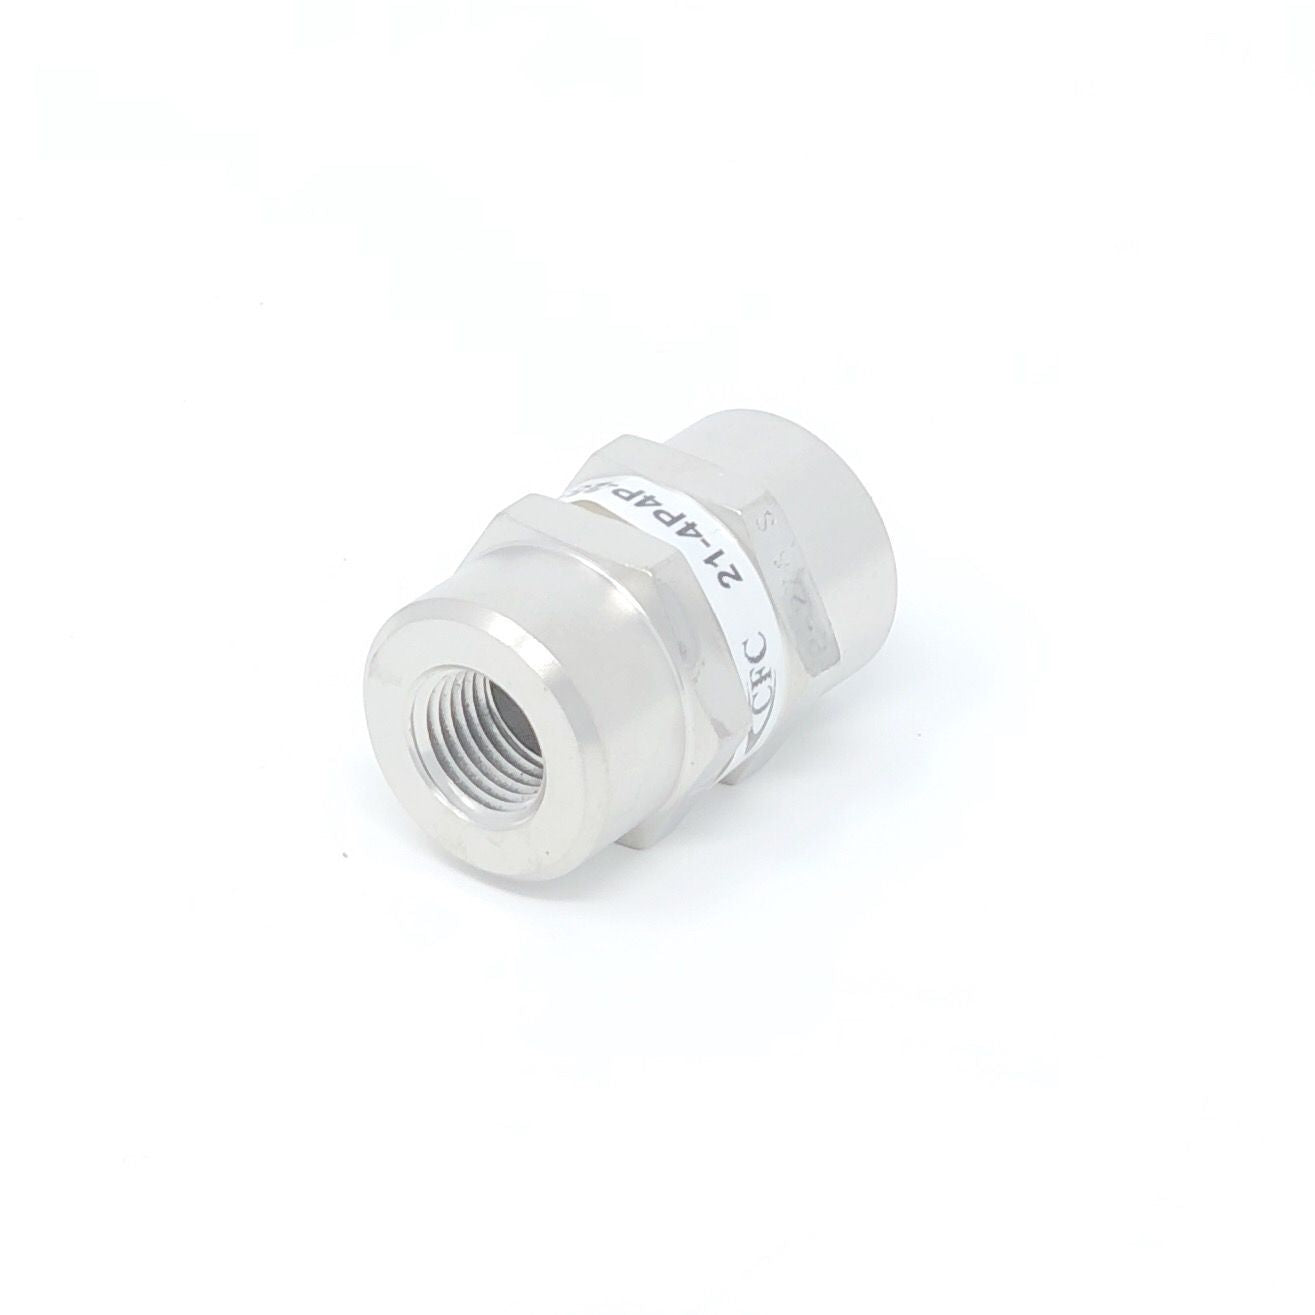 21-12T12T-40S : Chase High Pressure Inline Filter, 3000psi, 3/4" 37 Degree Flare , 40 Micron, No Visual Indicator, With Bypass